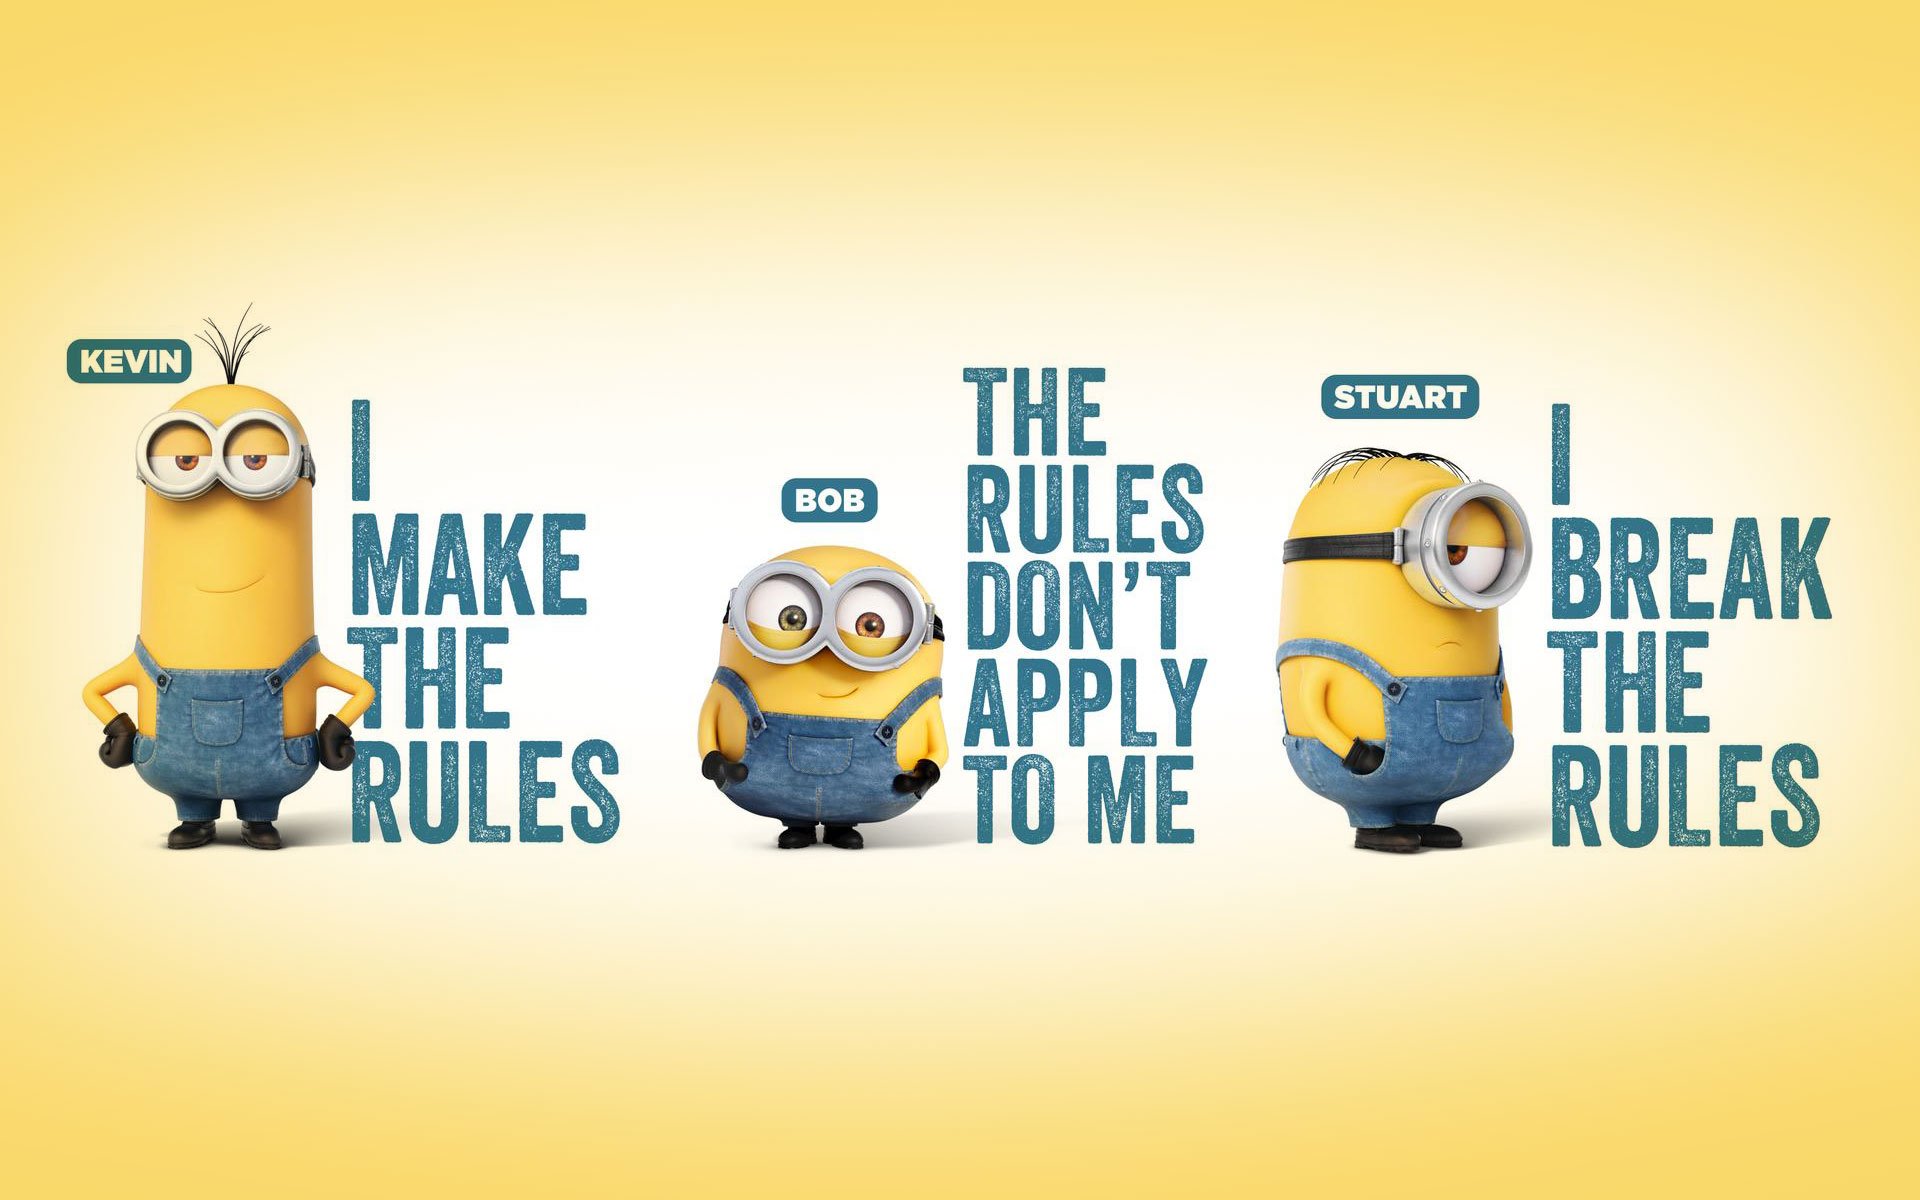 A Cute Collection Of Minions Movie 2015 Desktop Backgrounds & iPhone